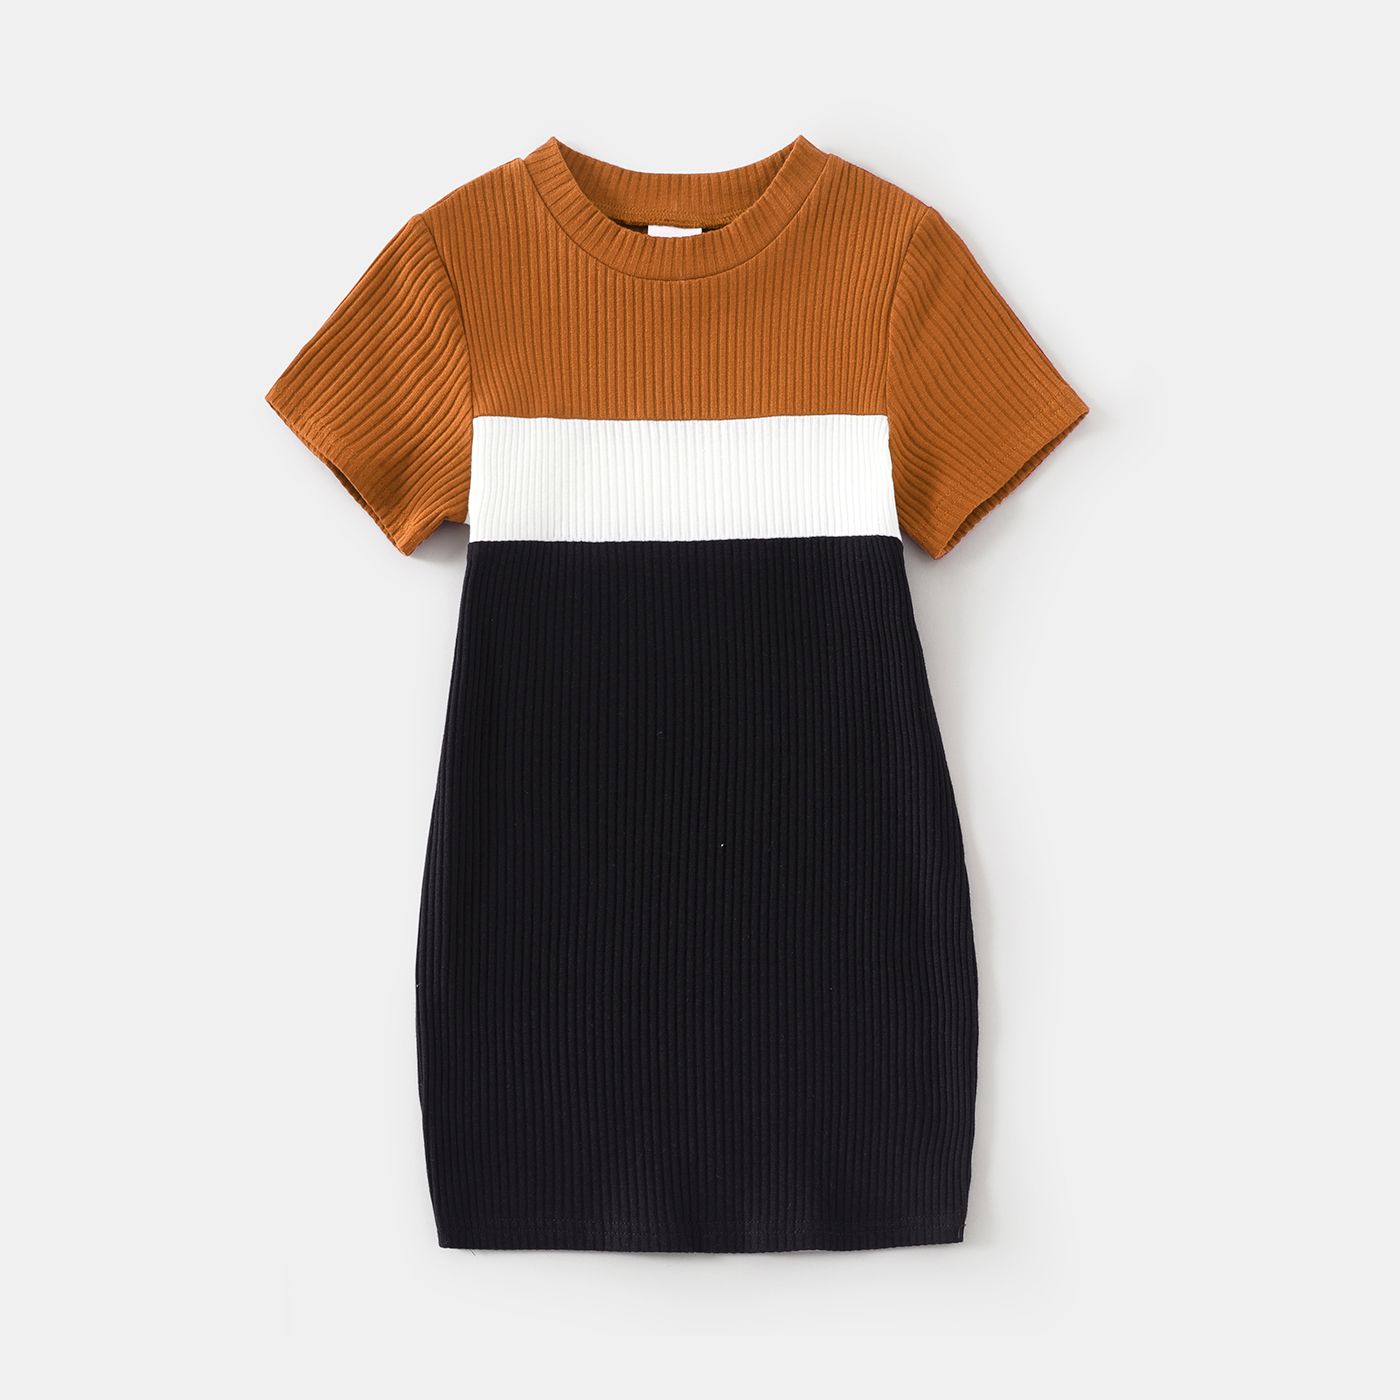 Family Matching Cotton Short-sleeve Colorblock Rib Knit Mock Neck Bodycon Dresses And Tops Sets